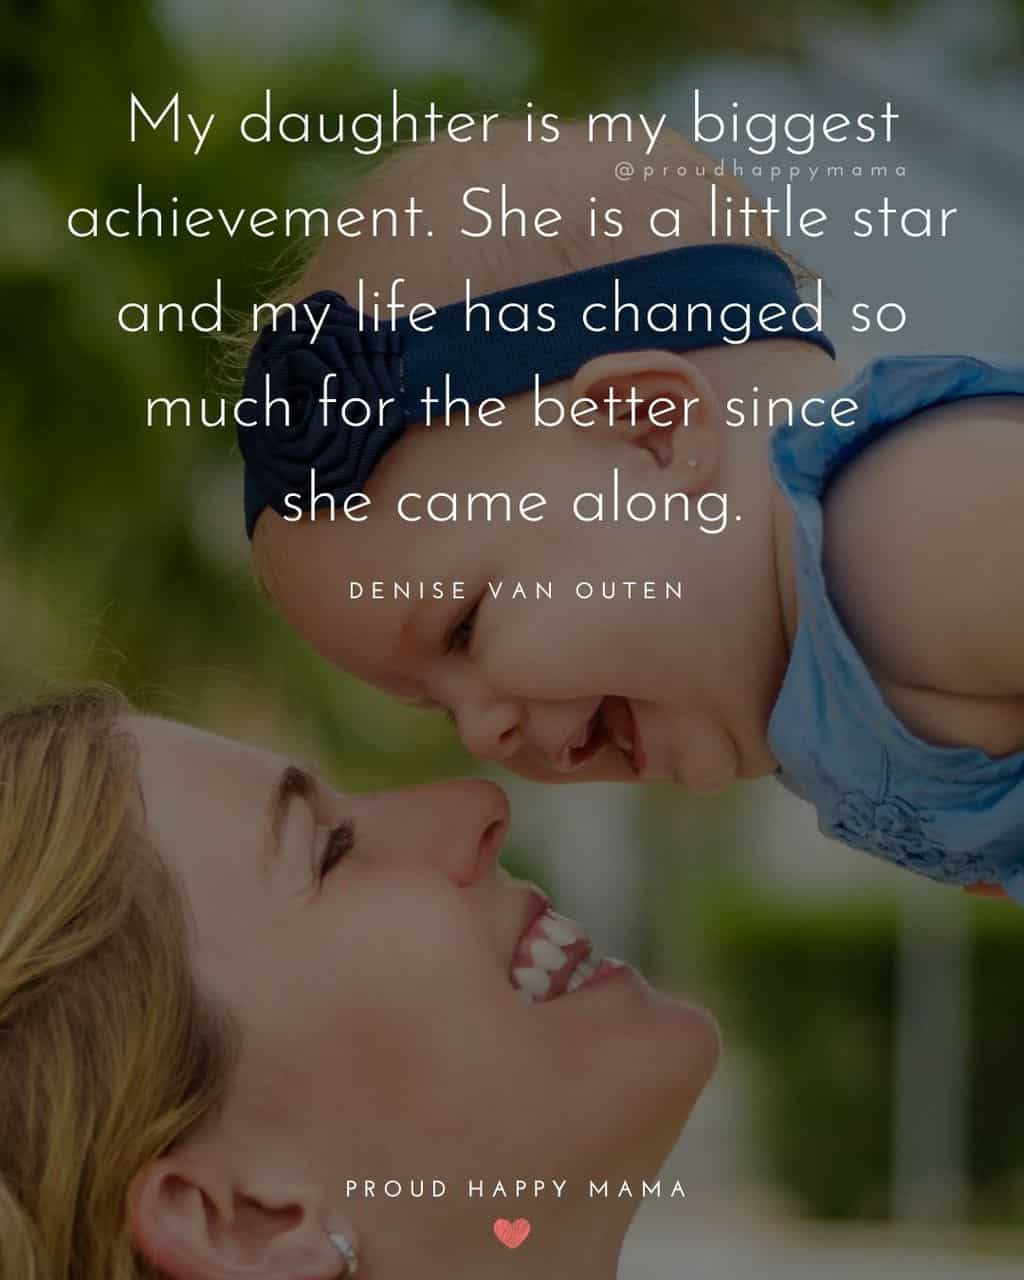 spending time with my daughter quotes - ‘My daughter is my biggest achievement. She is a little star and my life has changed so much for the better since she